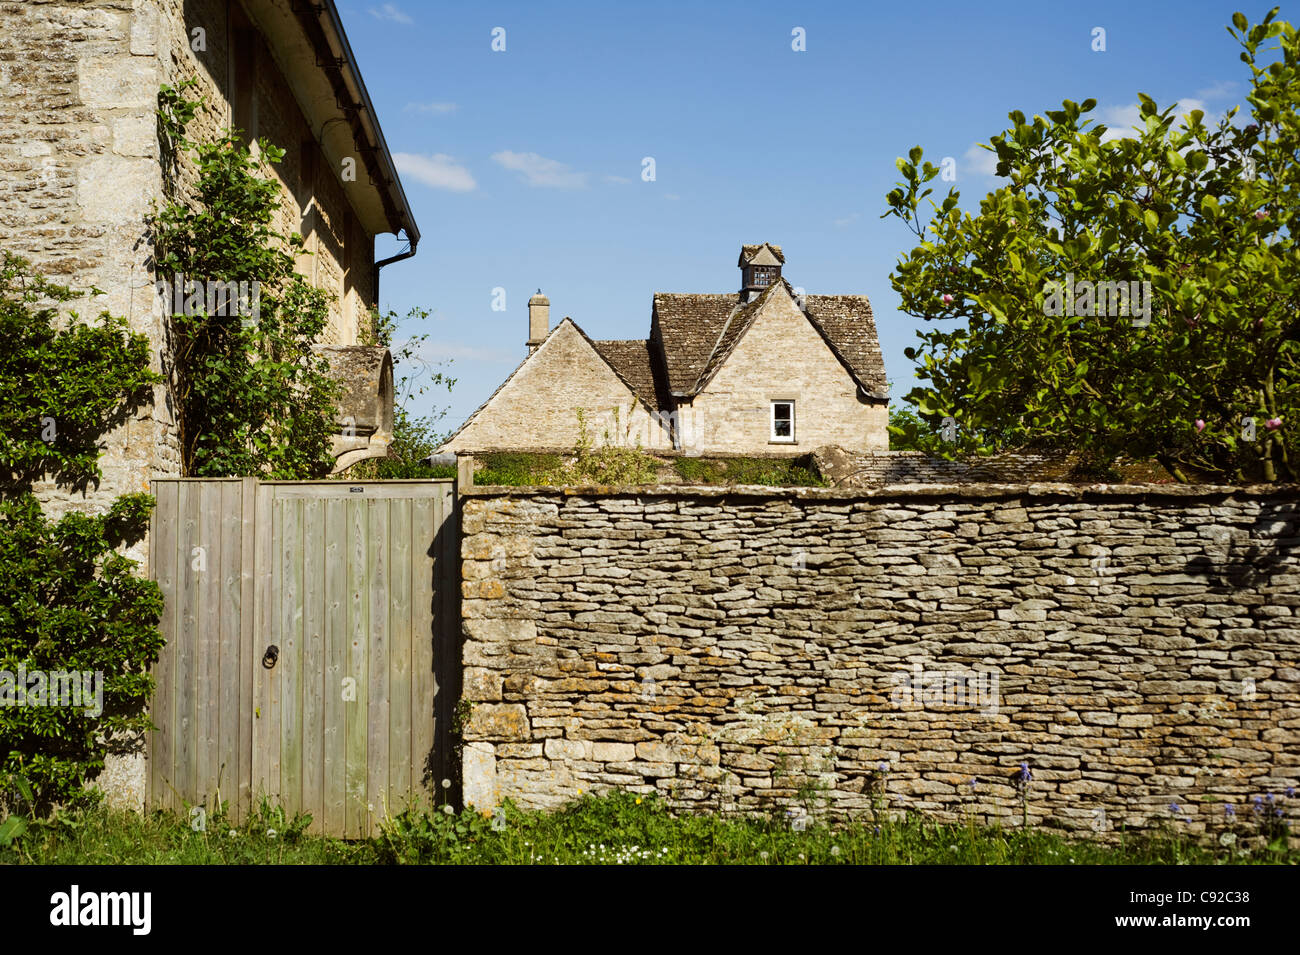 Many buildings and walls in the Cotswolds are built from the local limestone which has an attractive golden colour. Stock Photo